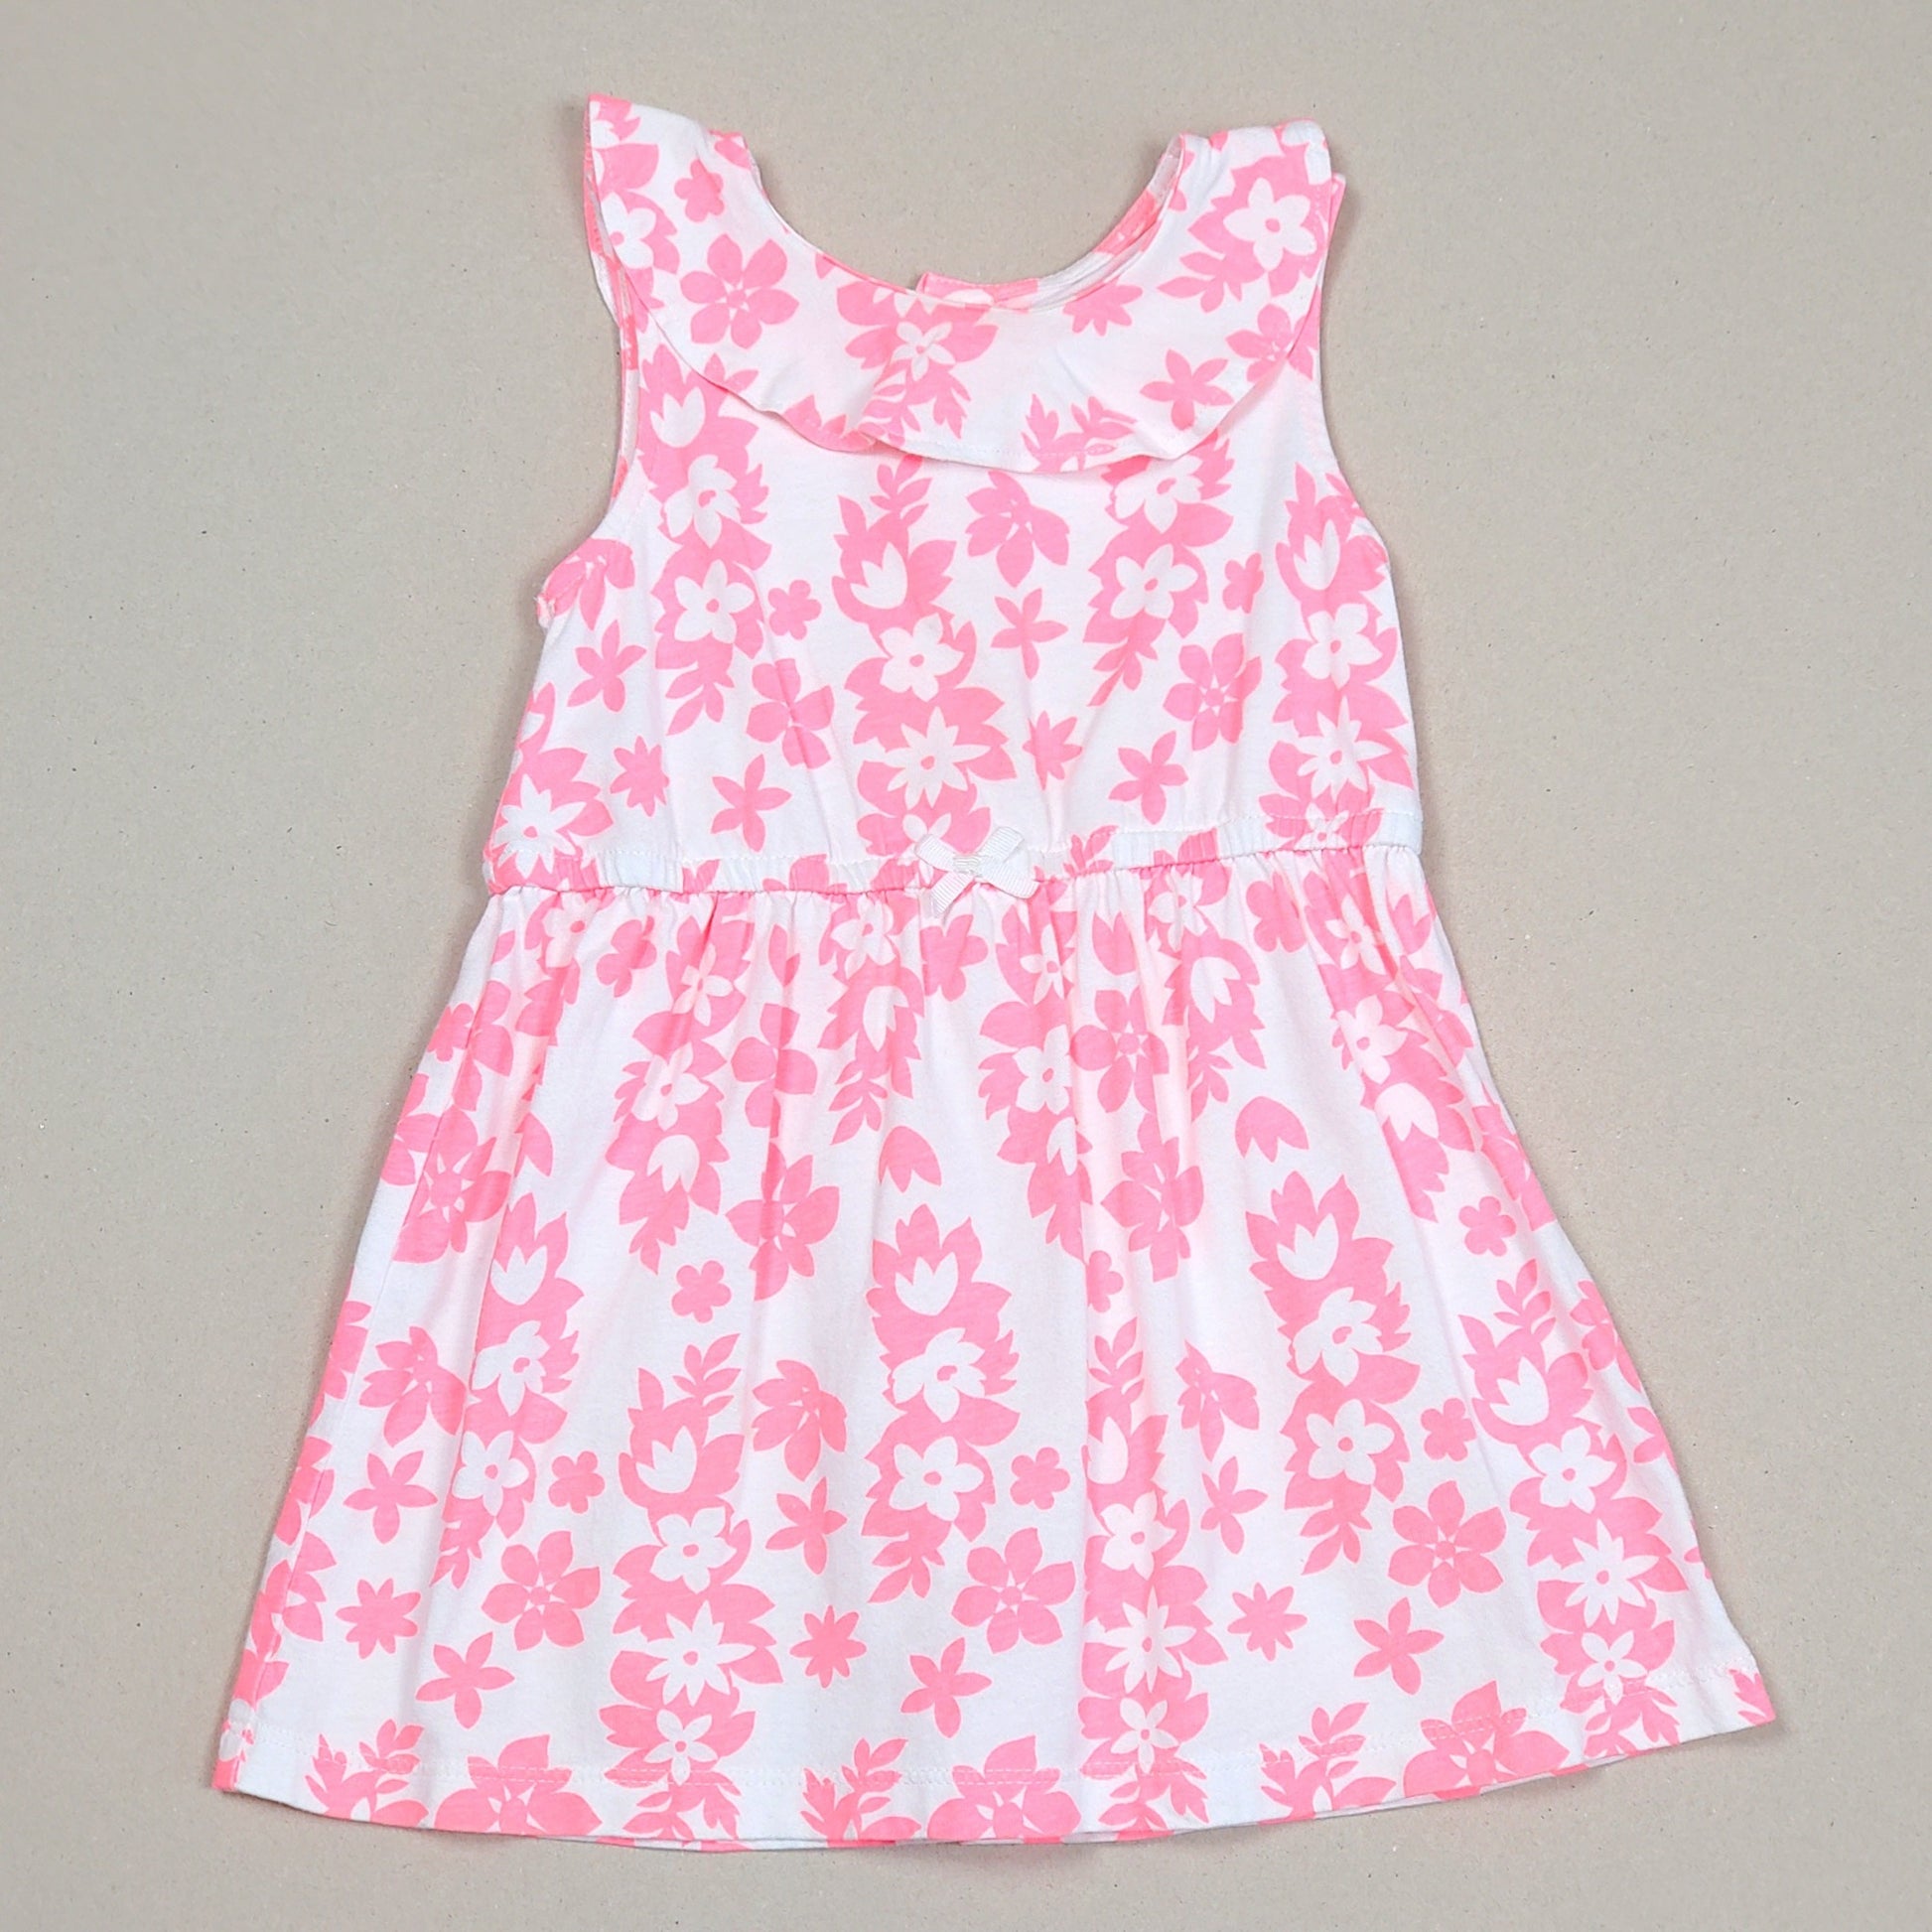 Carters Girls Pink White Floral Dress 18M Used View 1